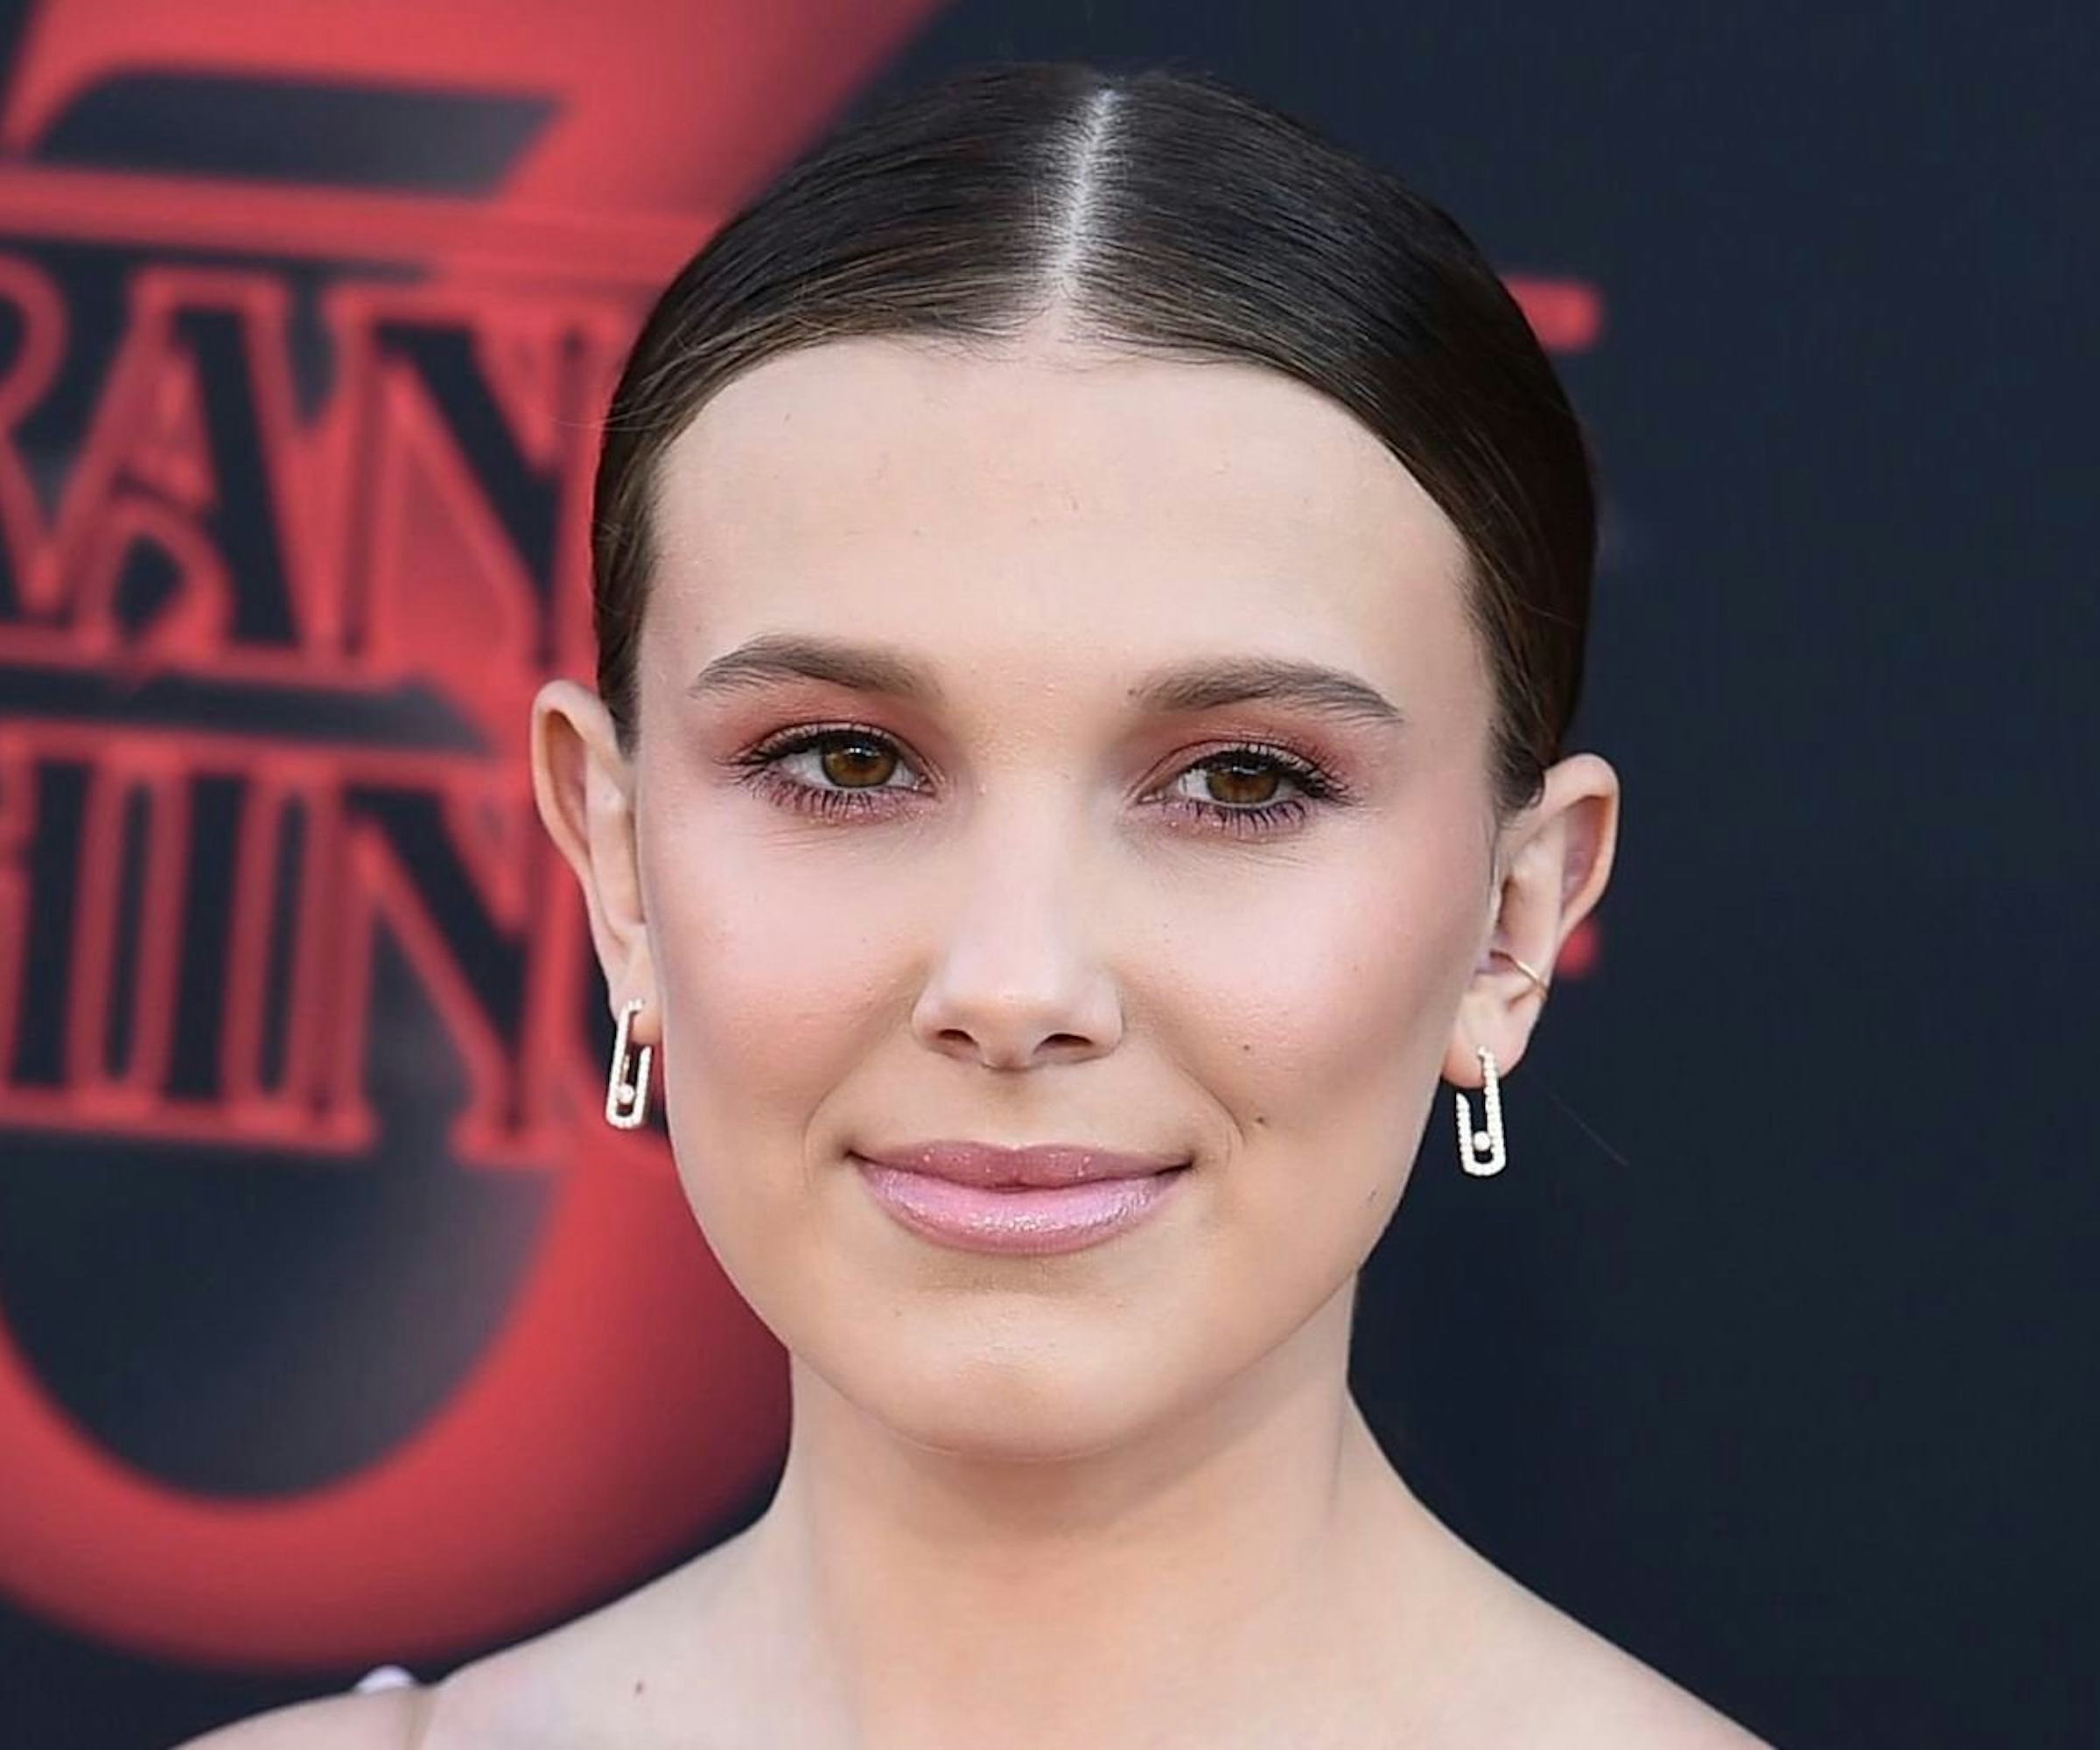 Millie Bobby Brown Just Wore A Graphic Eye Makeup Look